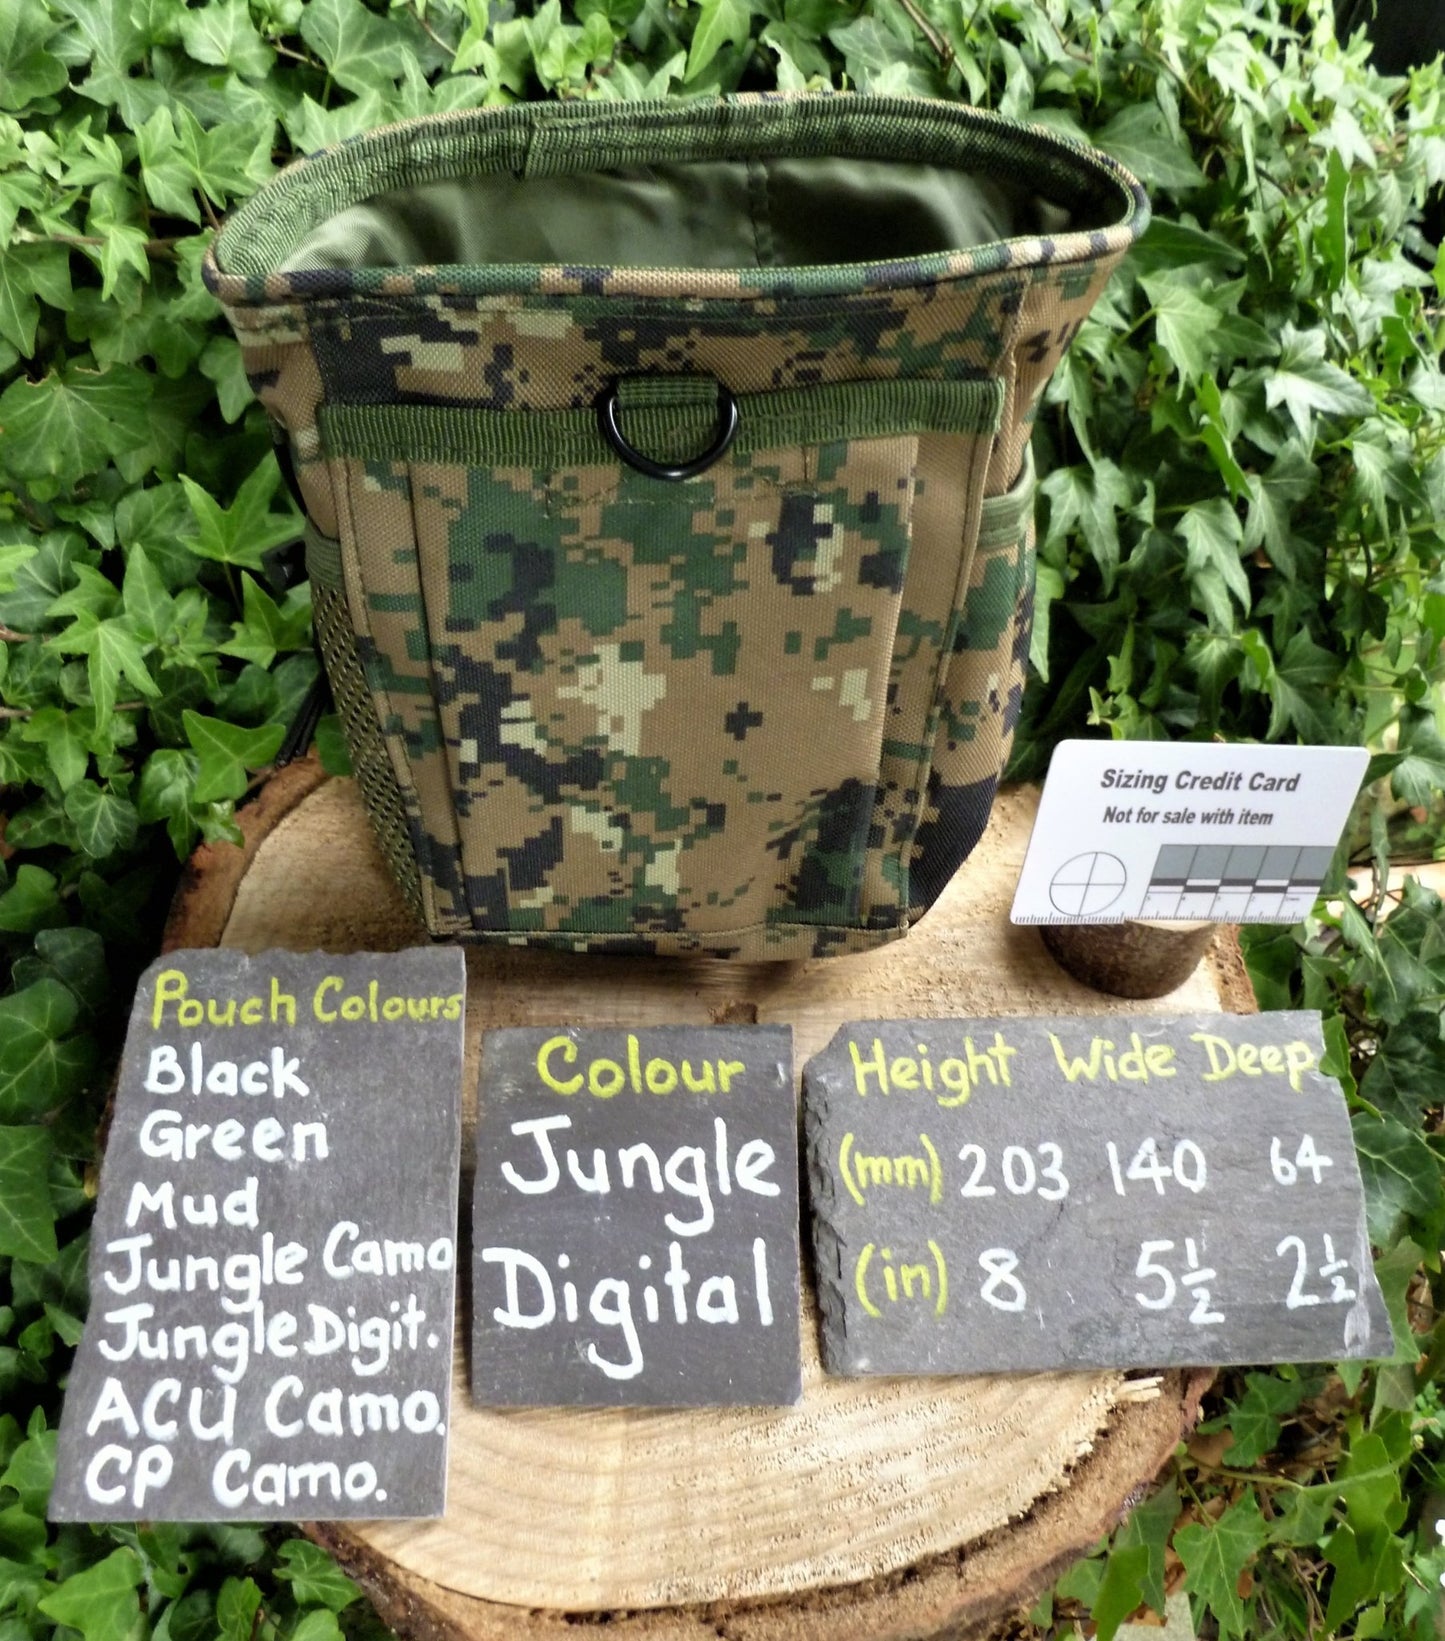 Foraging Pouches, Metal detecting or Paintball Foraging Pouch Huggins Attic Jungle Digital Camo   [Huggins attic]